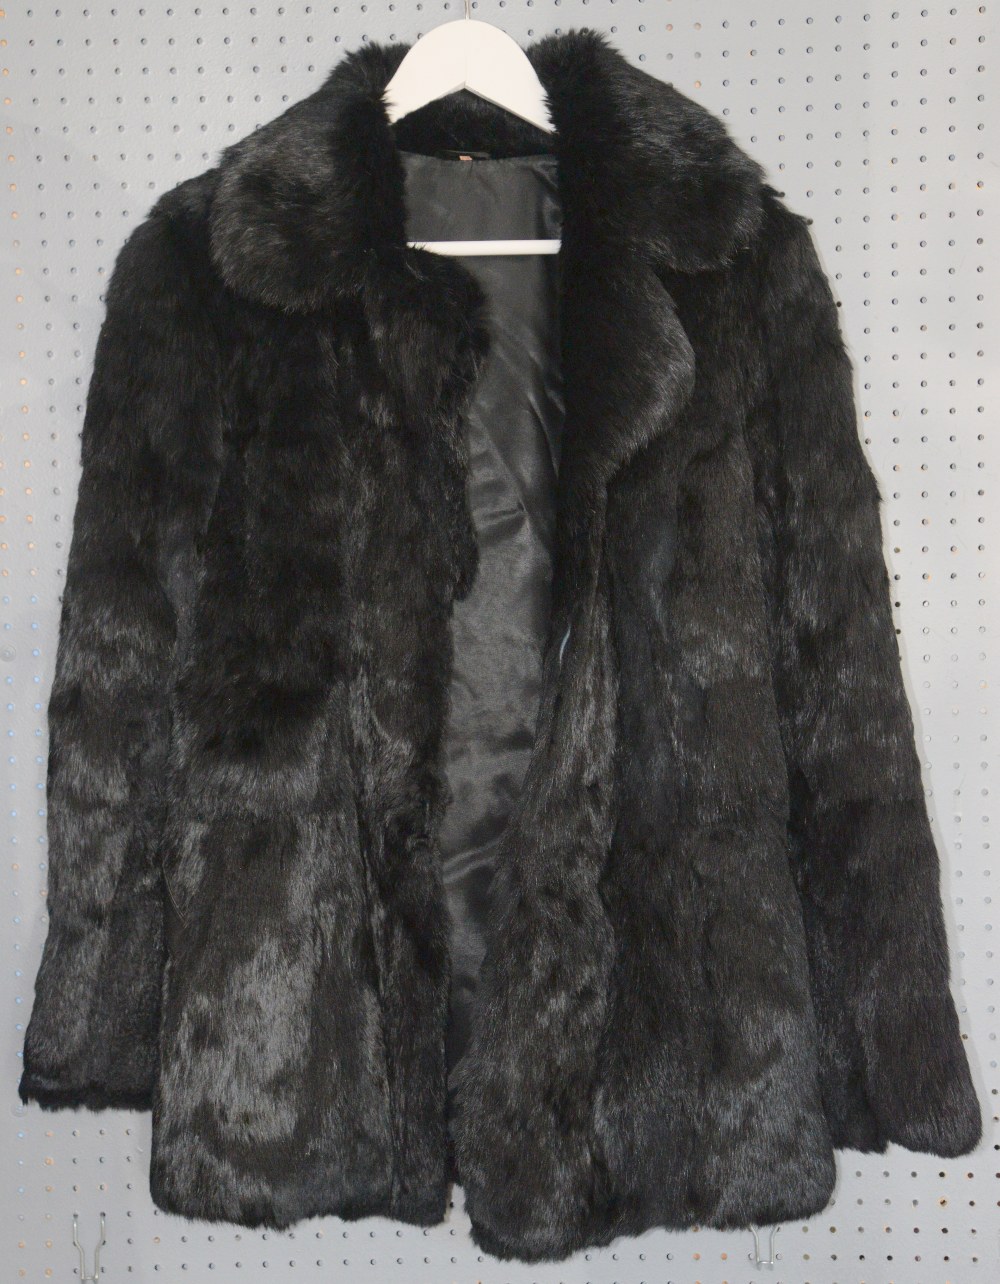 Assorted fur to include 5 fur coats-, 1 fur gilet, a red rabbit fur scarf, and black coat with fur - Image 8 of 9